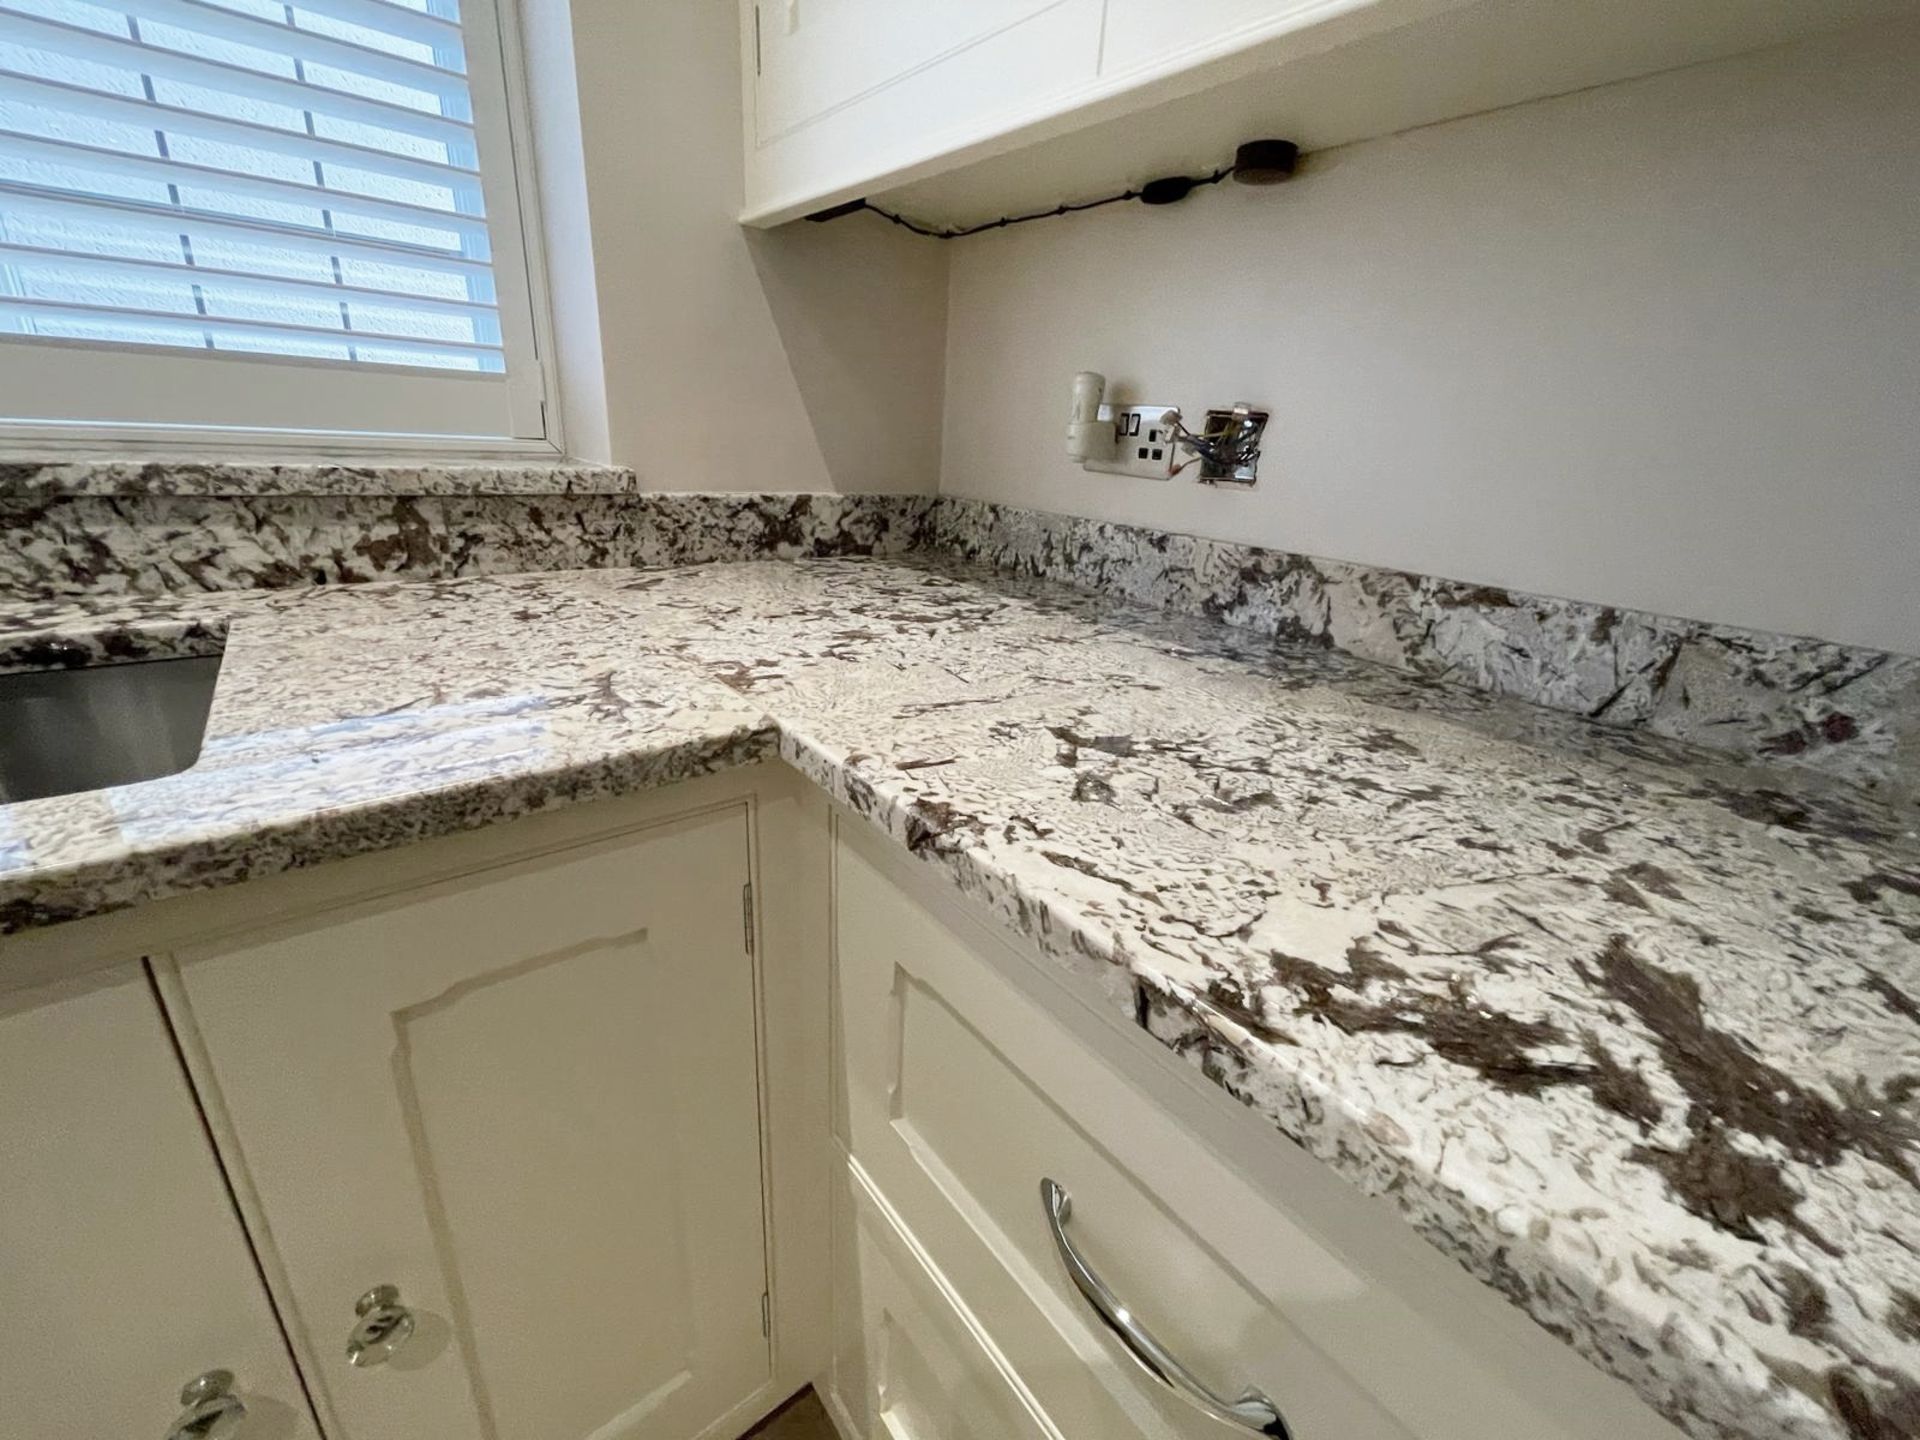 1 x Bespoke Fitted Solid Wood Kitchen with Natural Bianco Antico Grantite Work Surfaces - Image 14 of 61